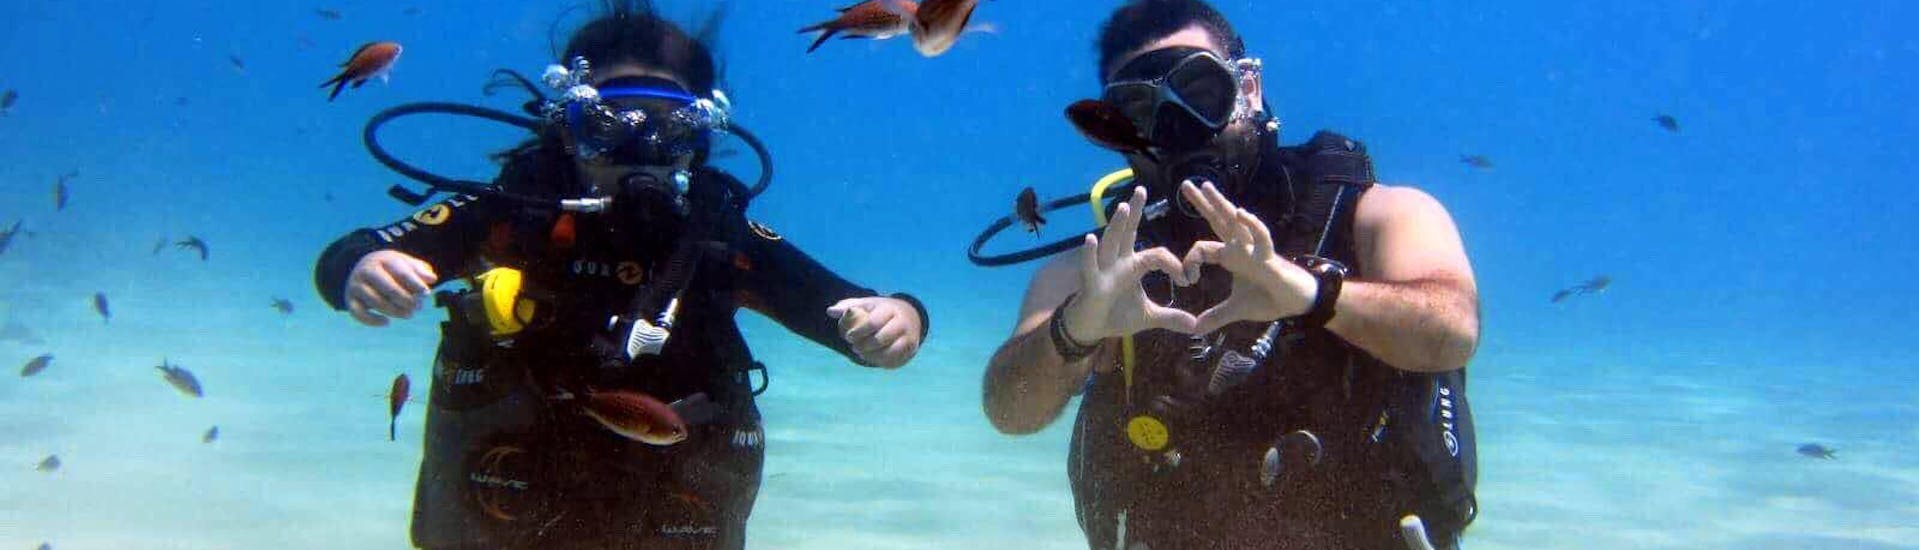 Two divers enjoying their first experience under water on their Trial Scuba Diving Course for Beginners - Discover Scuba together with an experienced instructor from Evelin Dive Center.